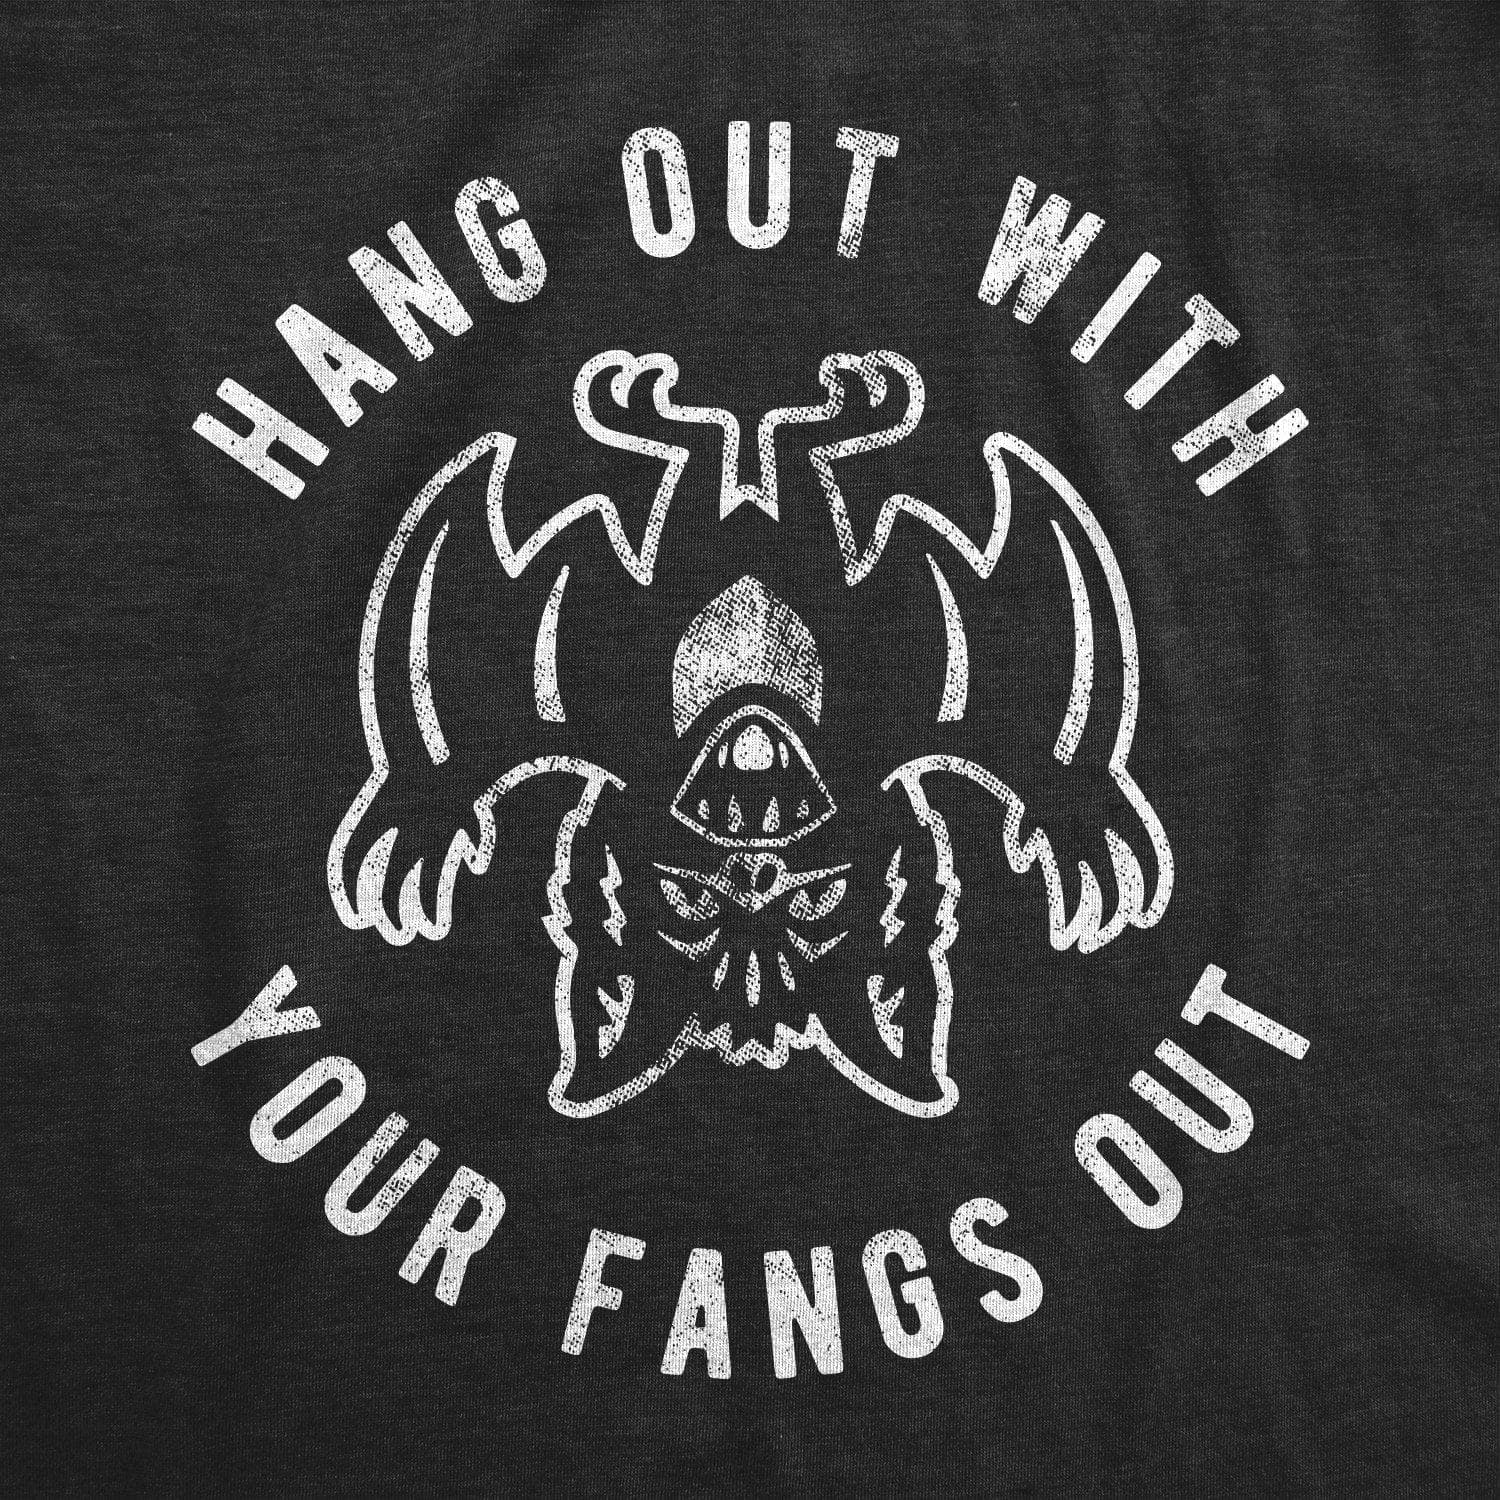 Hang Out With Your Fangs Out Women's Tshirt - Crazy Dog T-Shirts